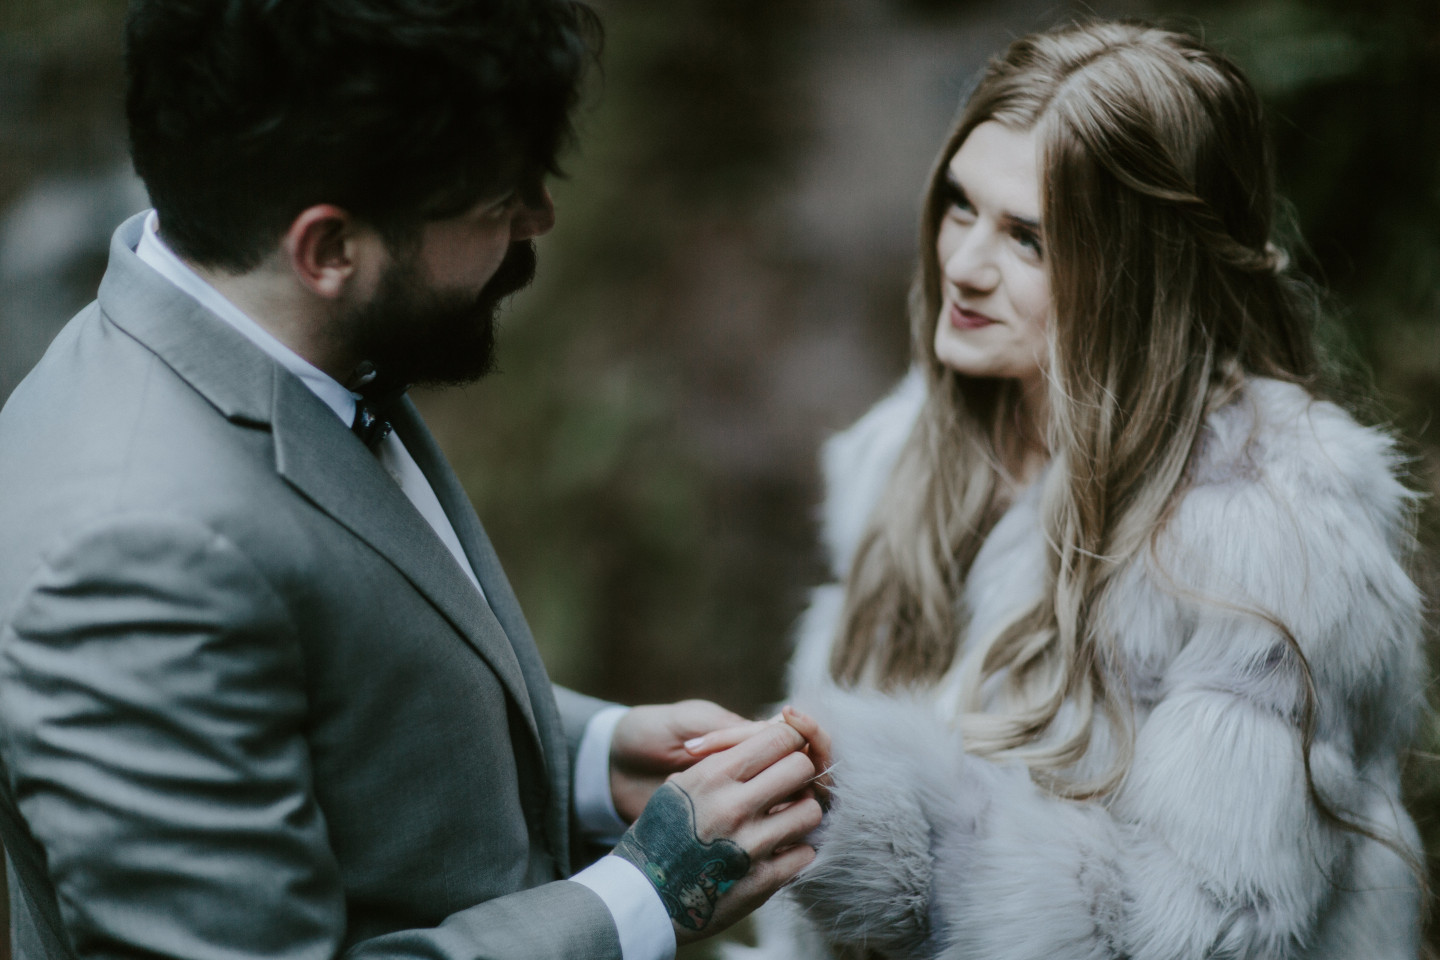 Boris reciting vows to Tyanna during their elopement ceremony in Latourell Falls, OR. Adventure elopement in the Columbia River Gorge by Sienna Plus Josh.